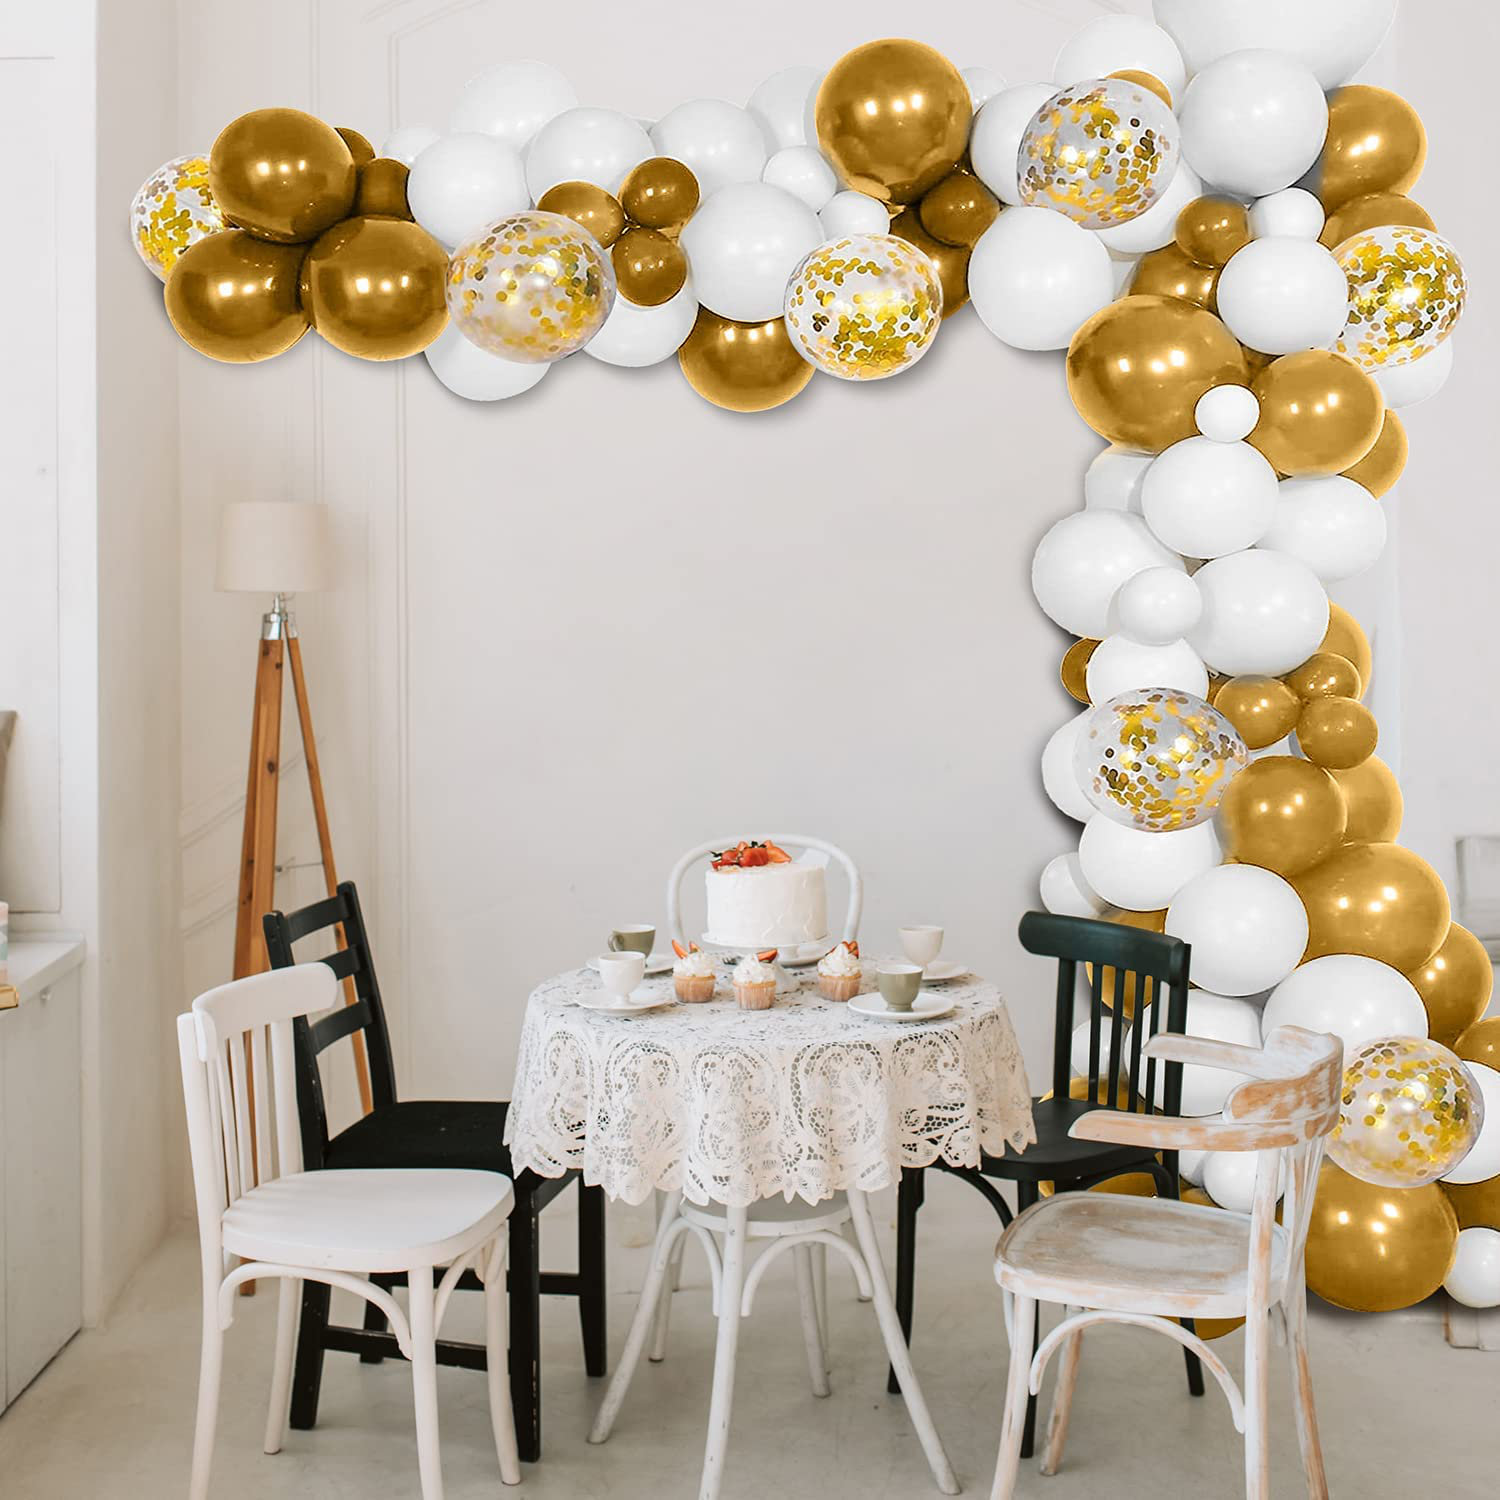 Abbie Home 125Pcs Party Balloon Arch Garland Kit Decorations With